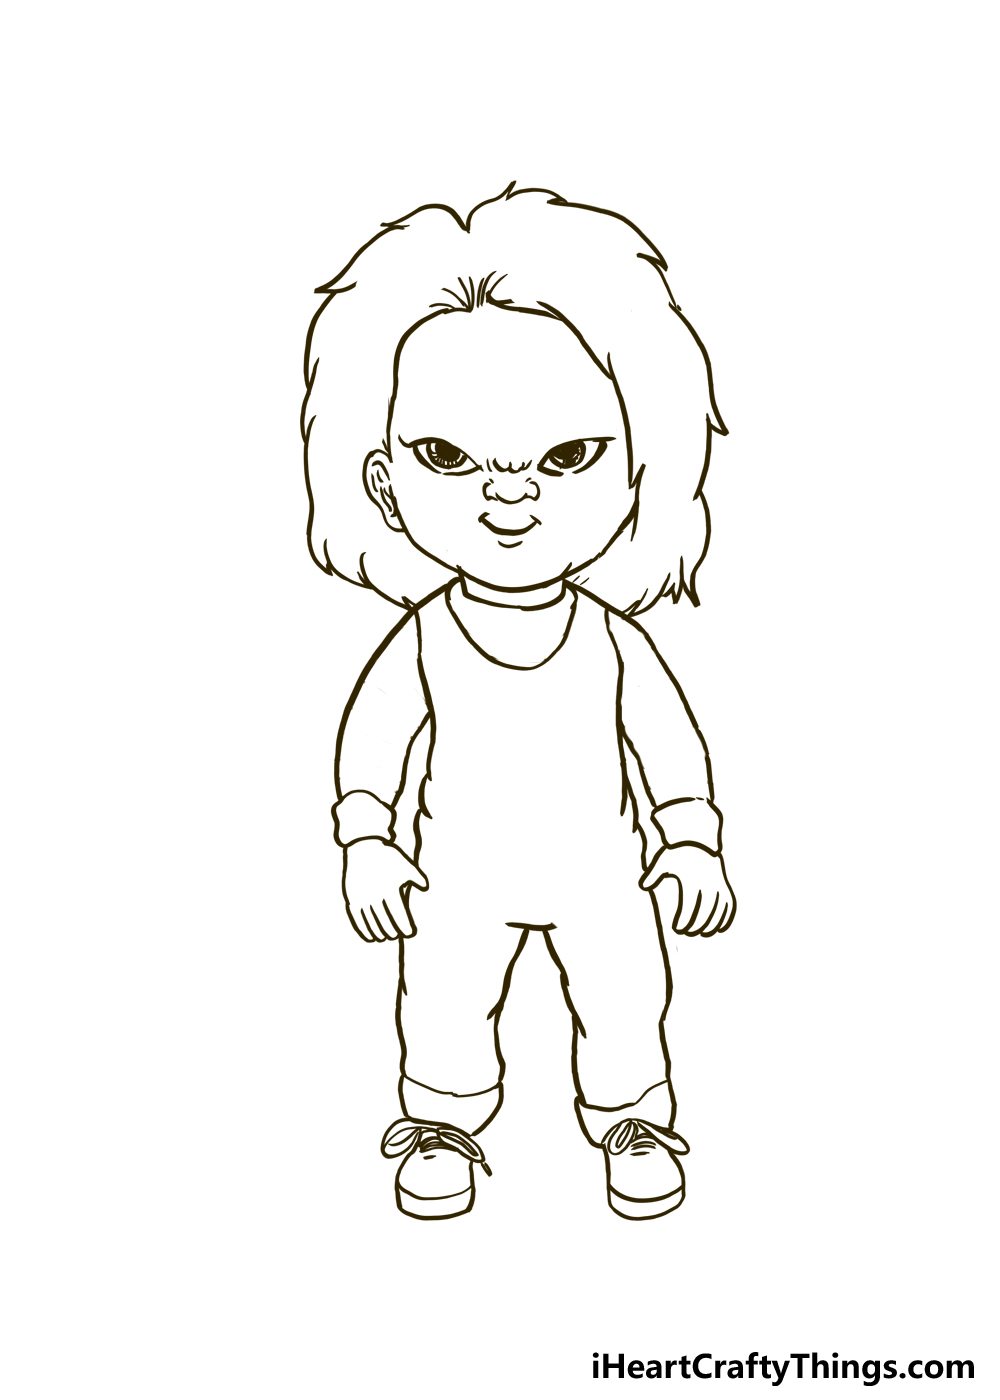 How to Draw Chucky step 4